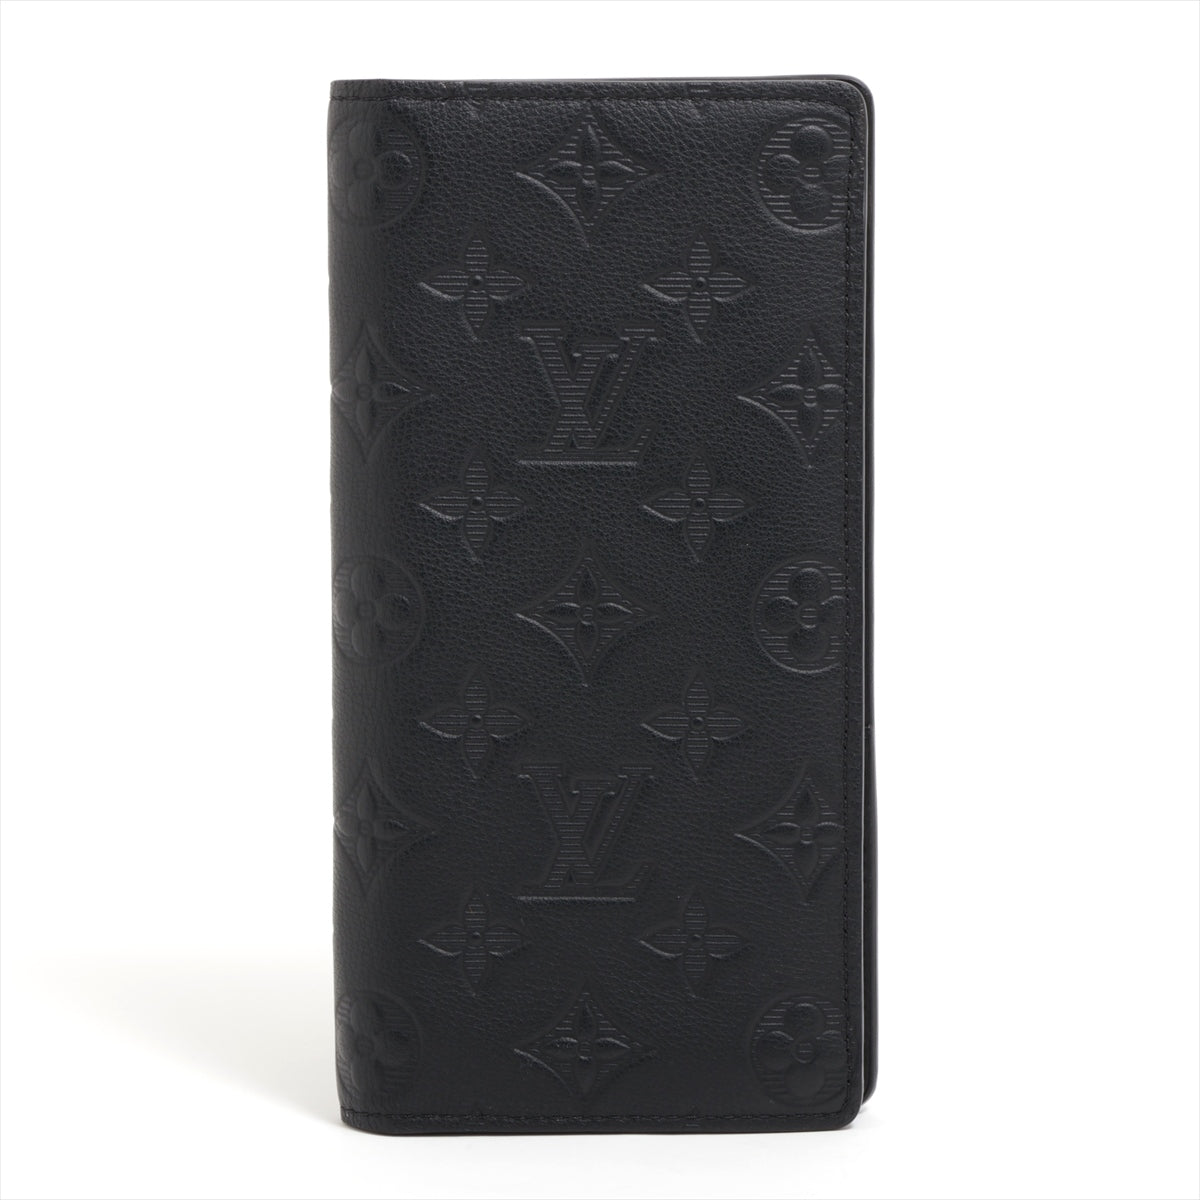 Louis Vuitton Monogram Shadow Portefeuille Brazza M62900 Black RFID There is a reaction